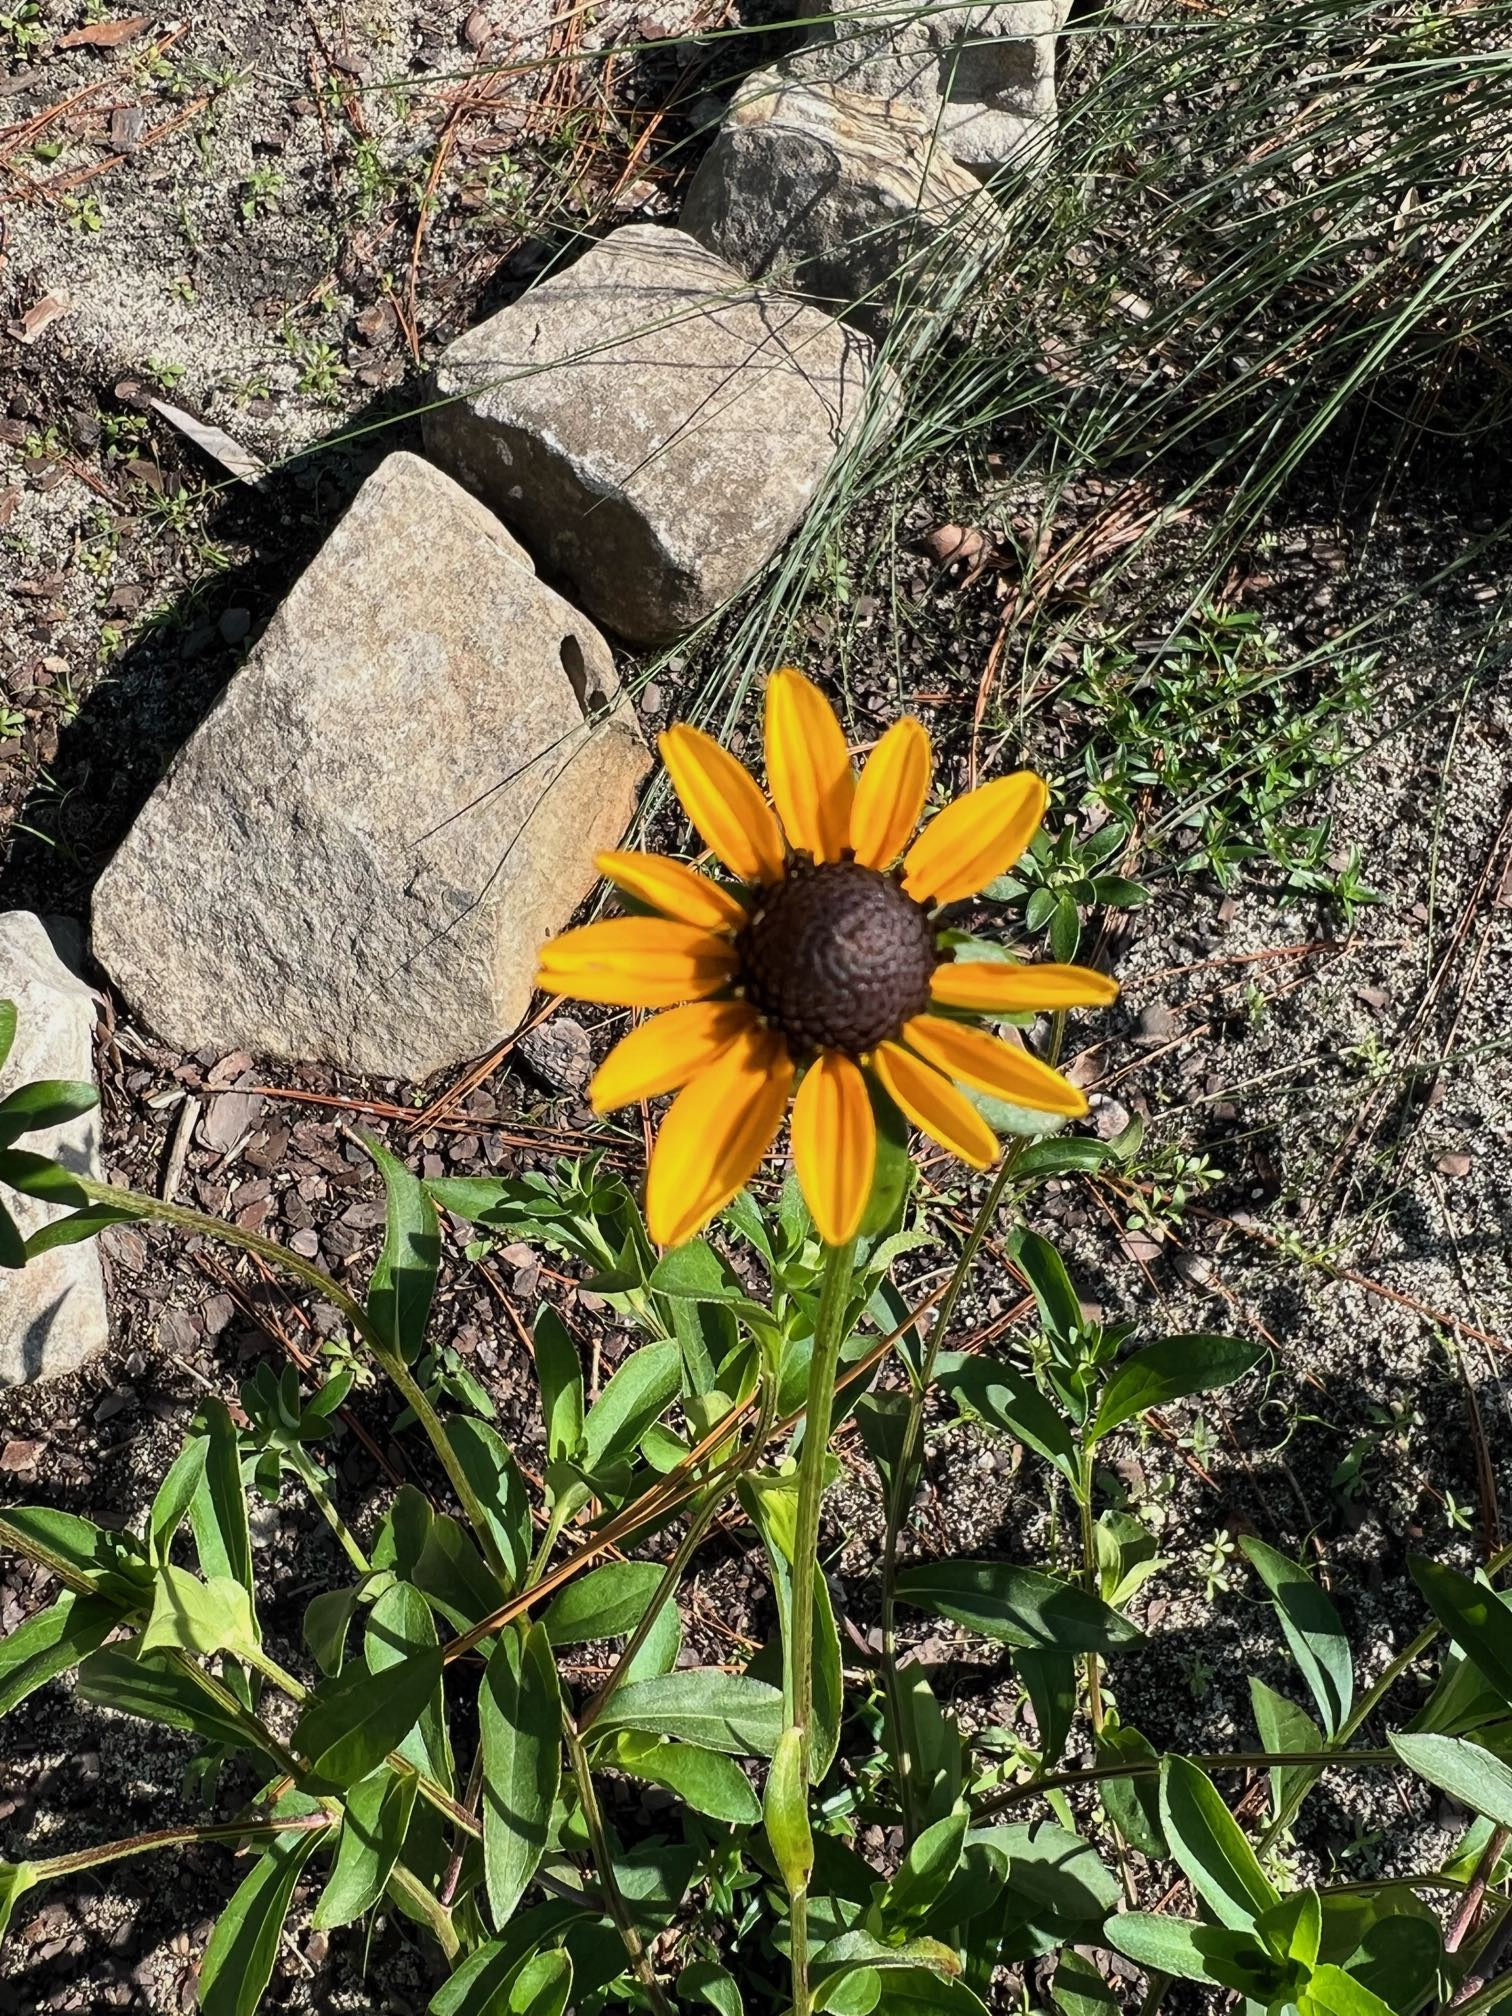 The Scientific Name is Rudbeckia fulgida. You will likely hear them called Eastern Coneflower. This picture shows the Orange to orange-yellow ray florets and dark brown central disk. of Rudbeckia fulgida